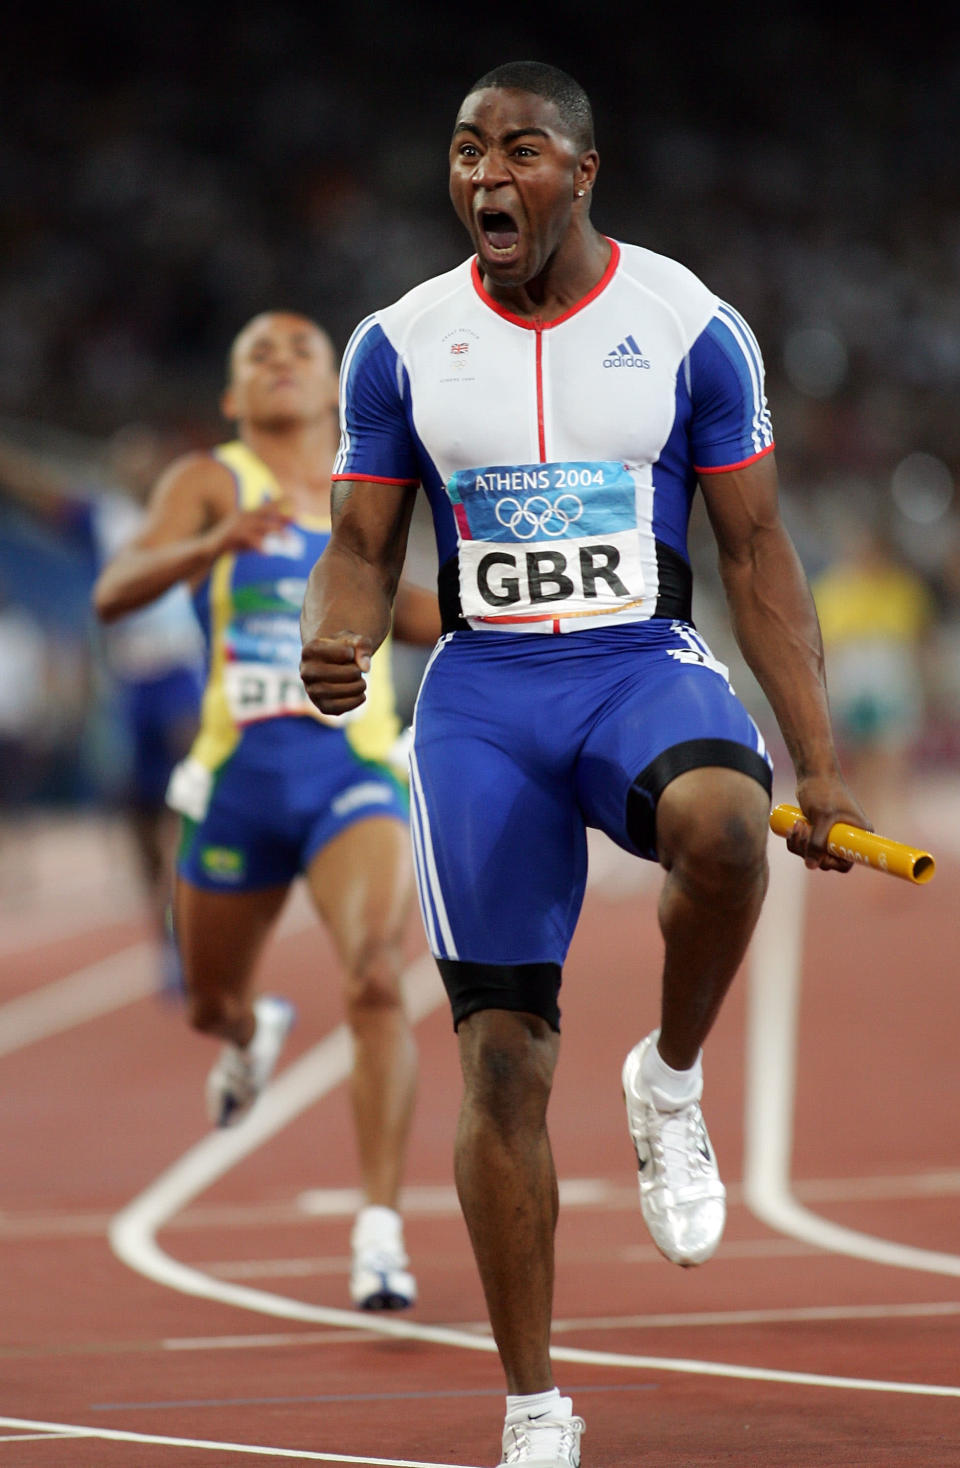 ATHENS - AUGUST 28: Mark Lewis-Francis of Great Britain celebrates after Great Britain won the men's 4 x 100 metre relay final on August 28, 2004 during the Athens 2004 Summer Olympic Games at the Olympic Stadium in the Sports Complex in Athens, Greece. (Photo by Michael Steele/Getty Images)